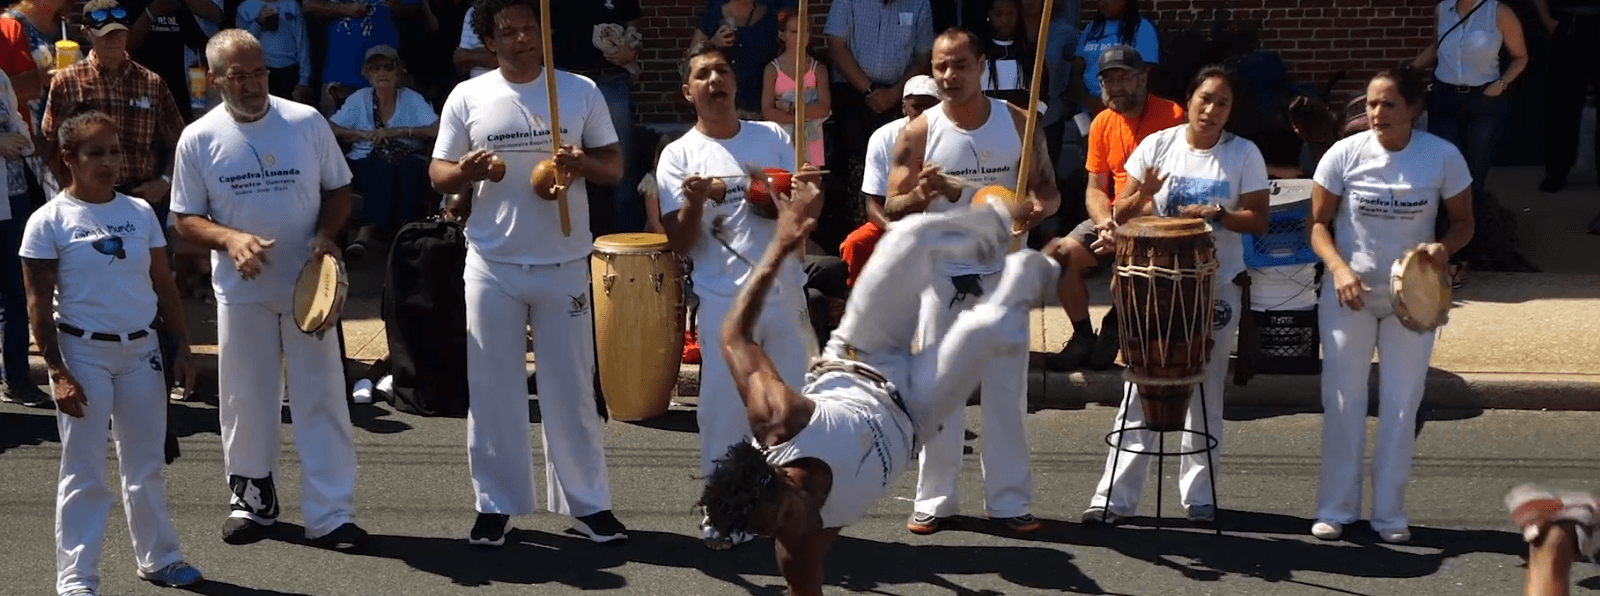 A dancer doing a flip in front of a group of other dancers who are gathered around playing instruments